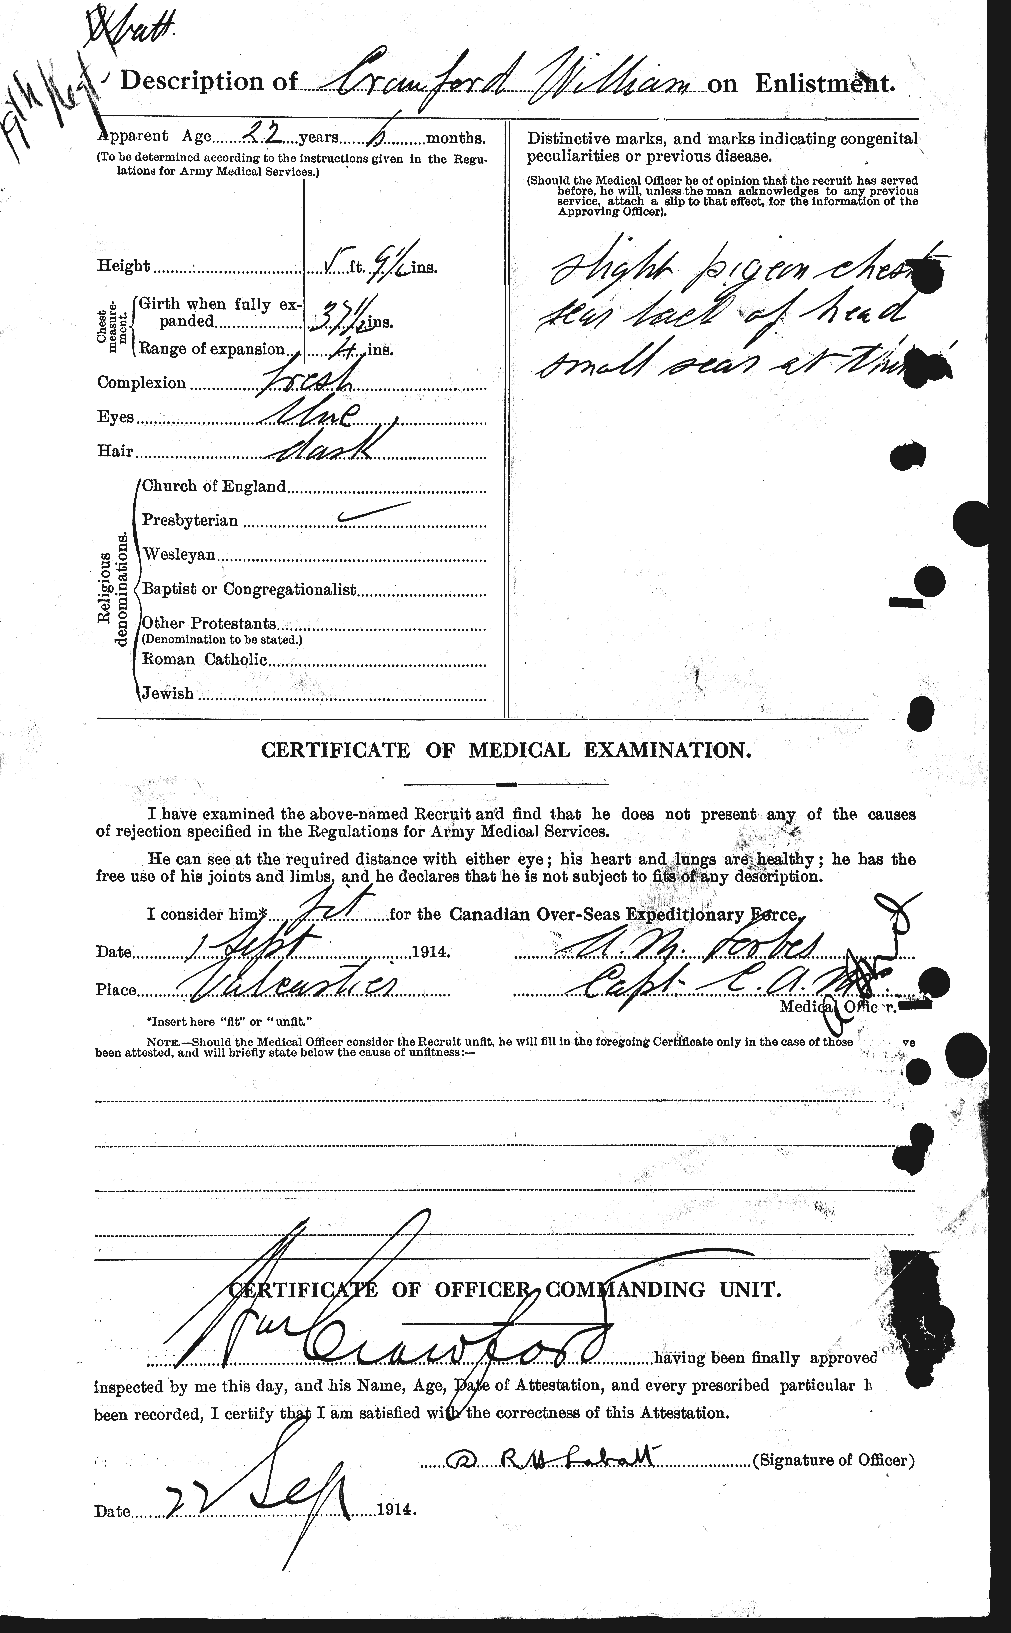 Personnel Records of the First World War - CEF 061162b